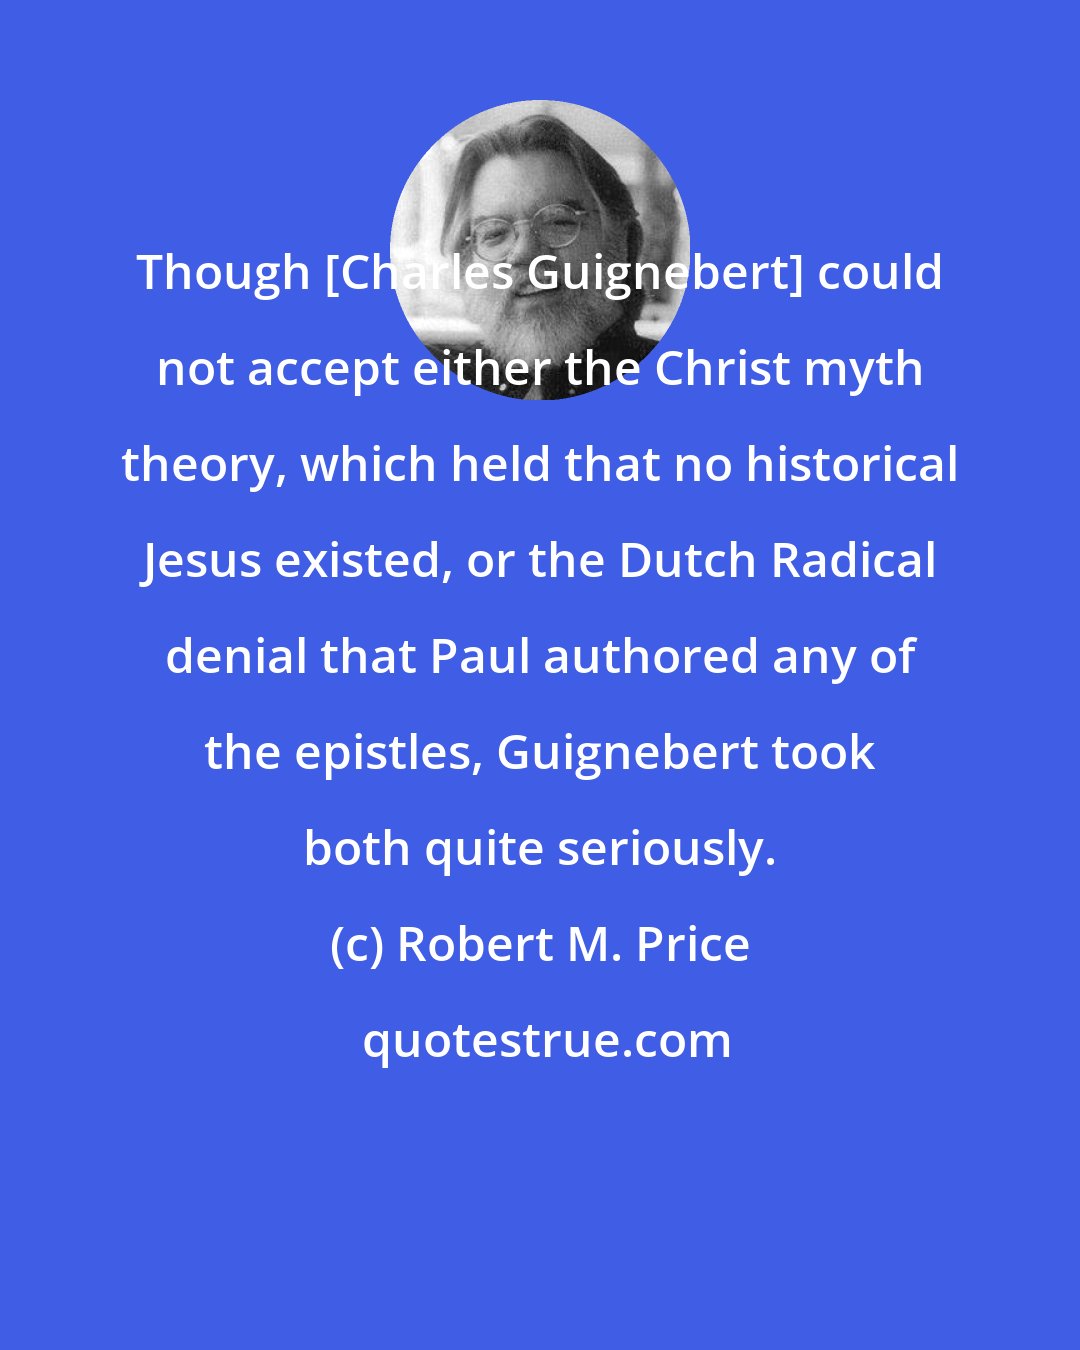 Robert M. Price: Though [Charles Guignebert] could not accept either the Christ myth theory, which held that no historical Jesus existed, or the Dutch Radical denial that Paul authored any of the epistles, Guignebert took both quite seriously.